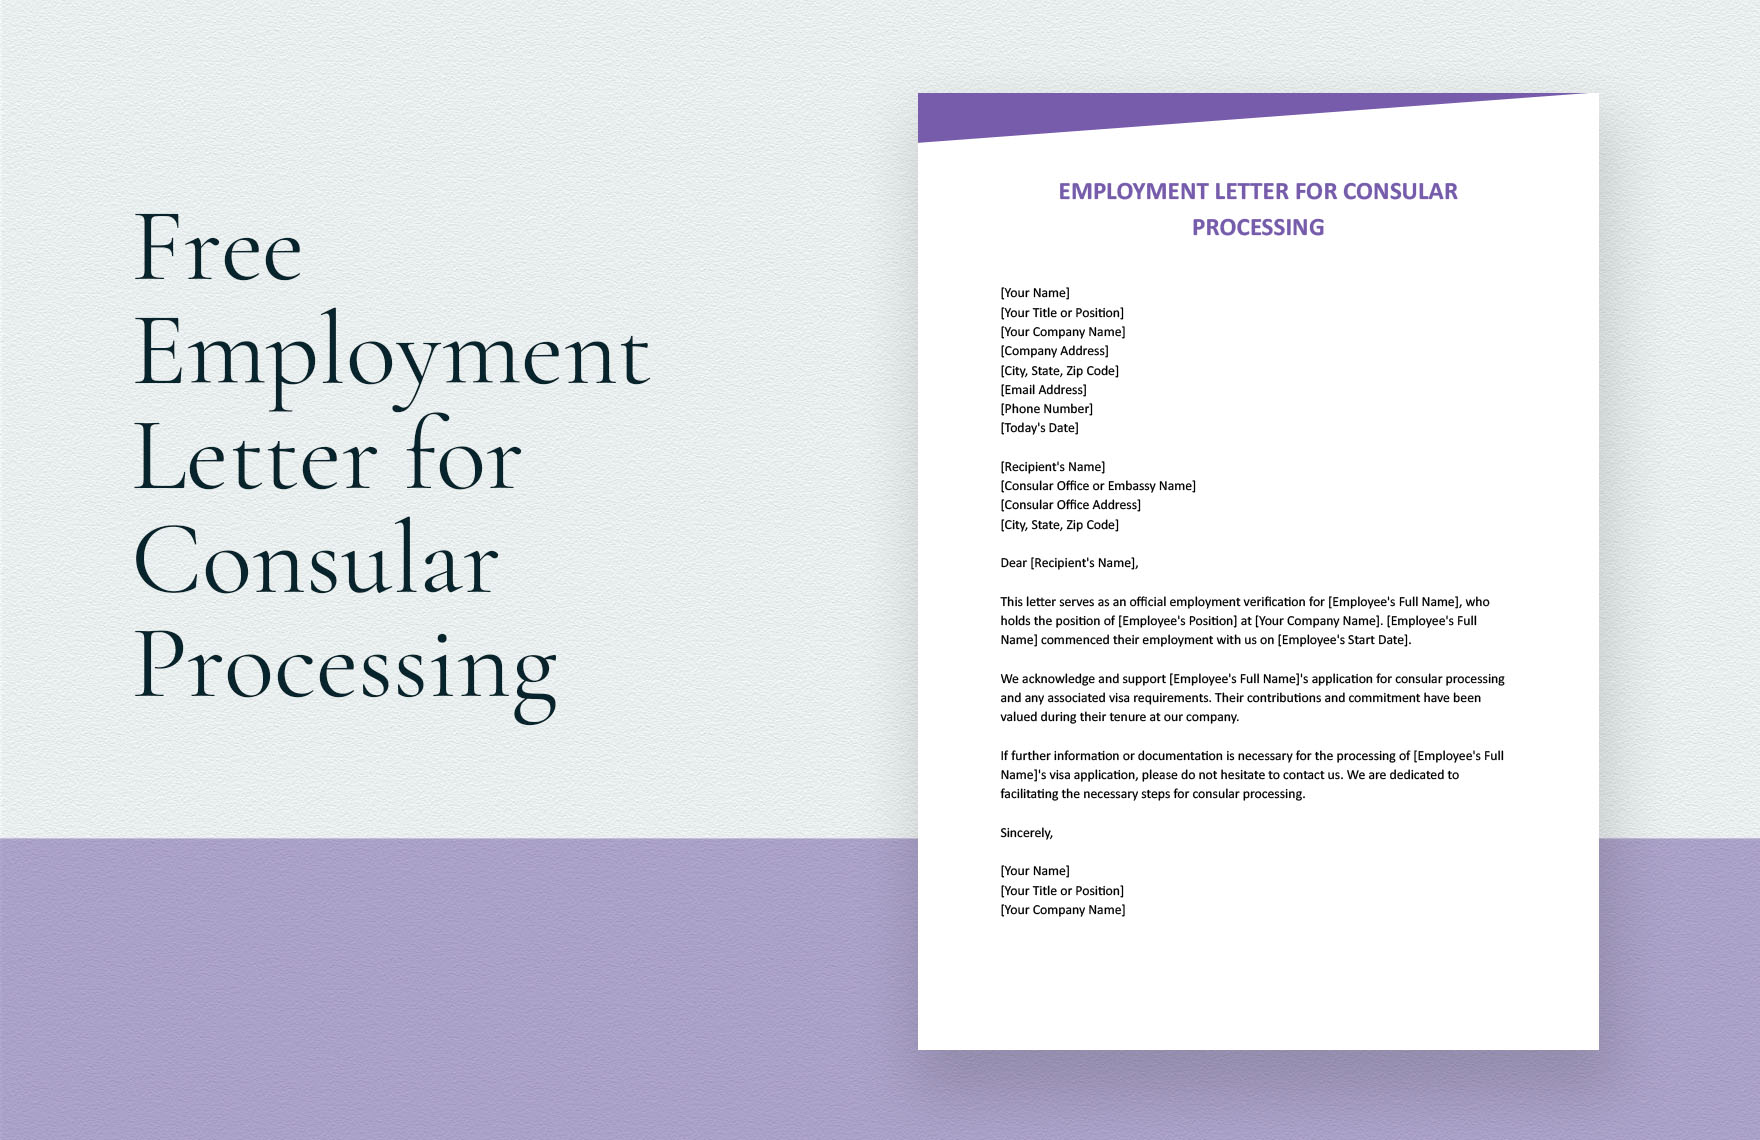 Free Employment Letter for Consular Processing